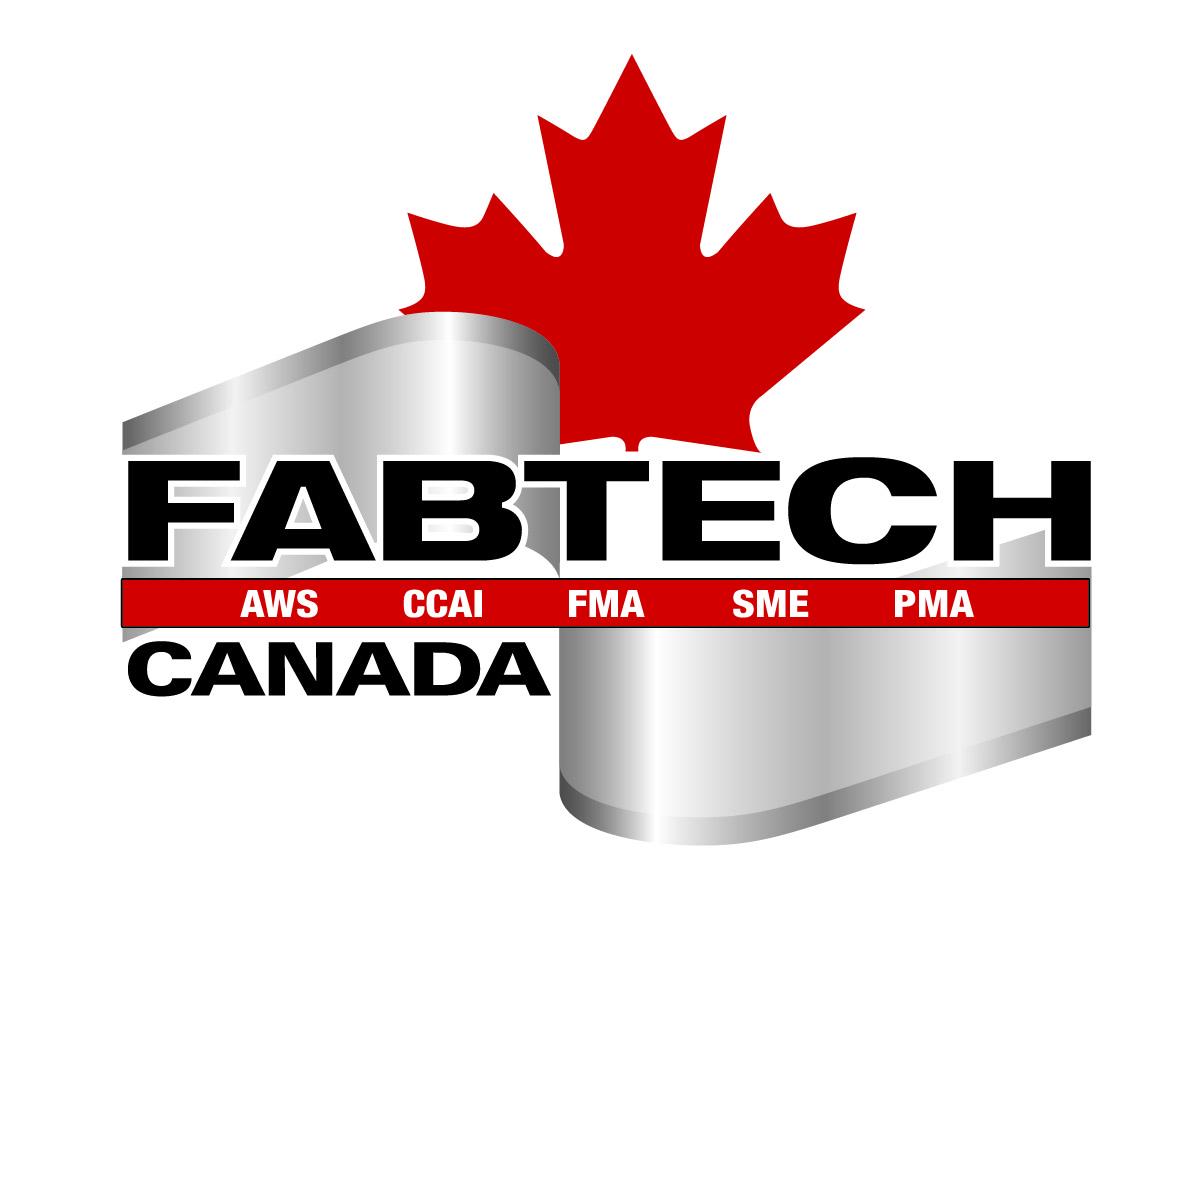 Fabtech Canada features over 20 educational sessions